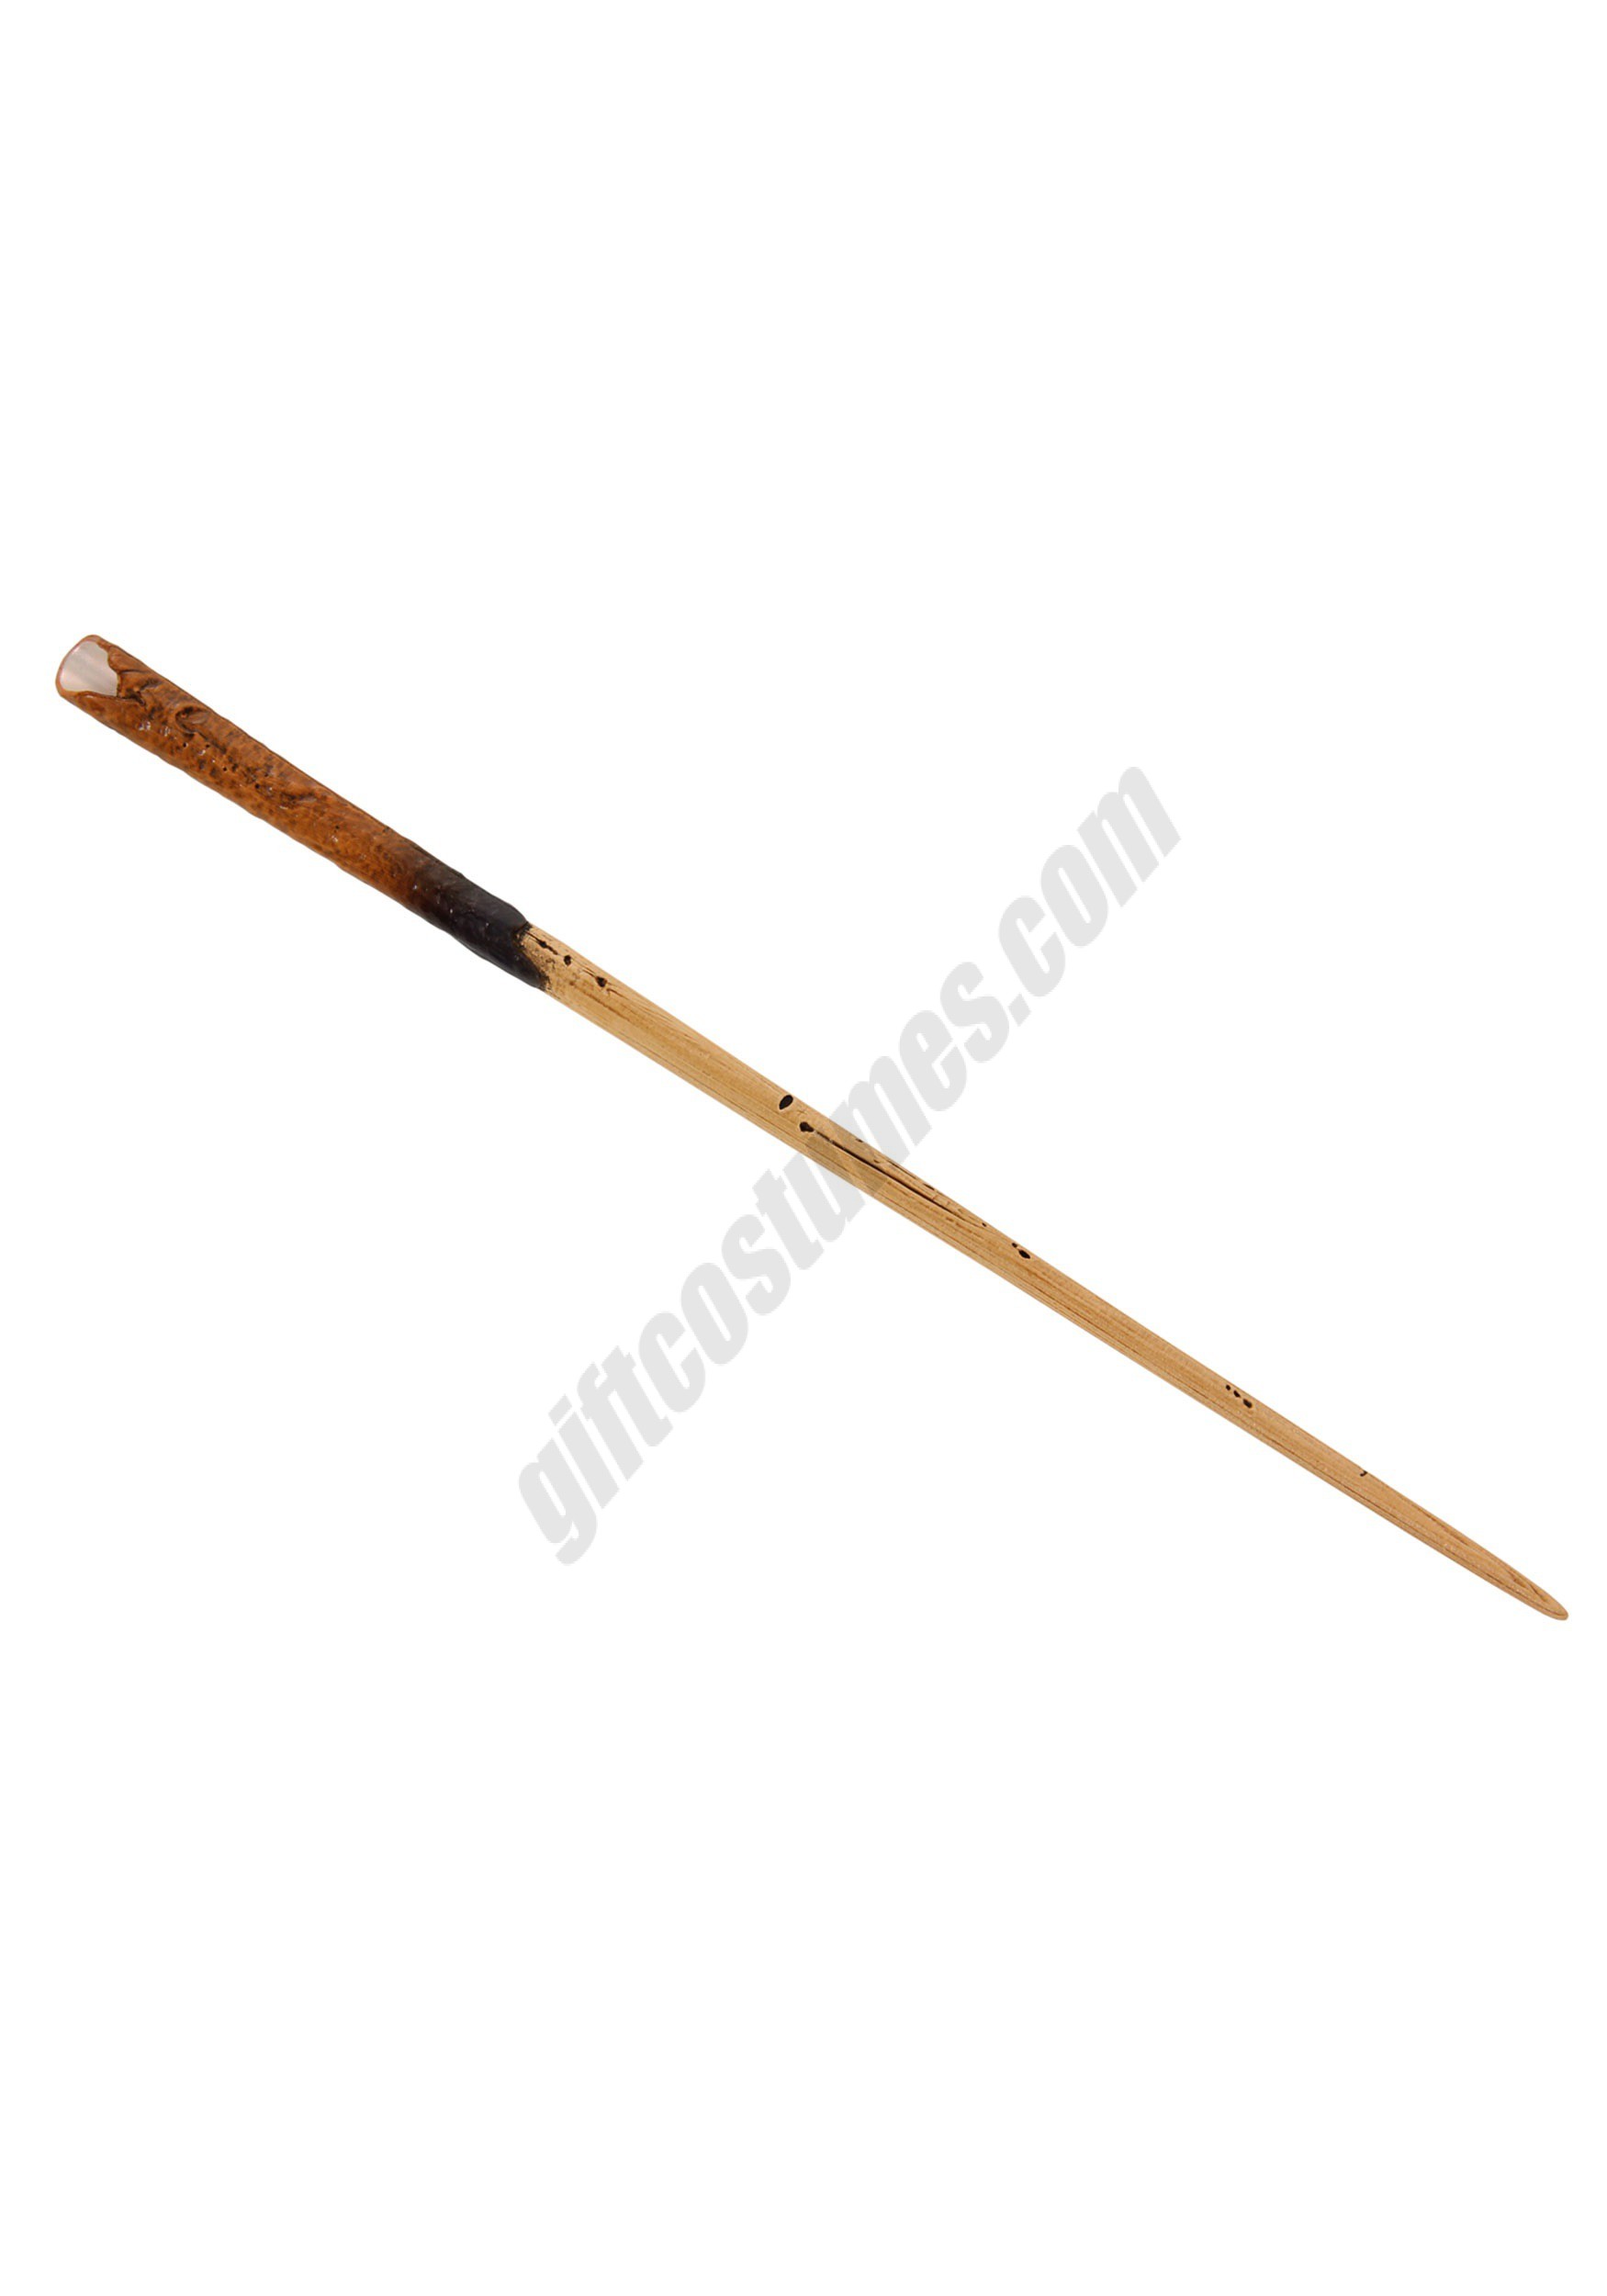 Newt Scamander Wand Promotions - Newt Scamander Wand Promotions